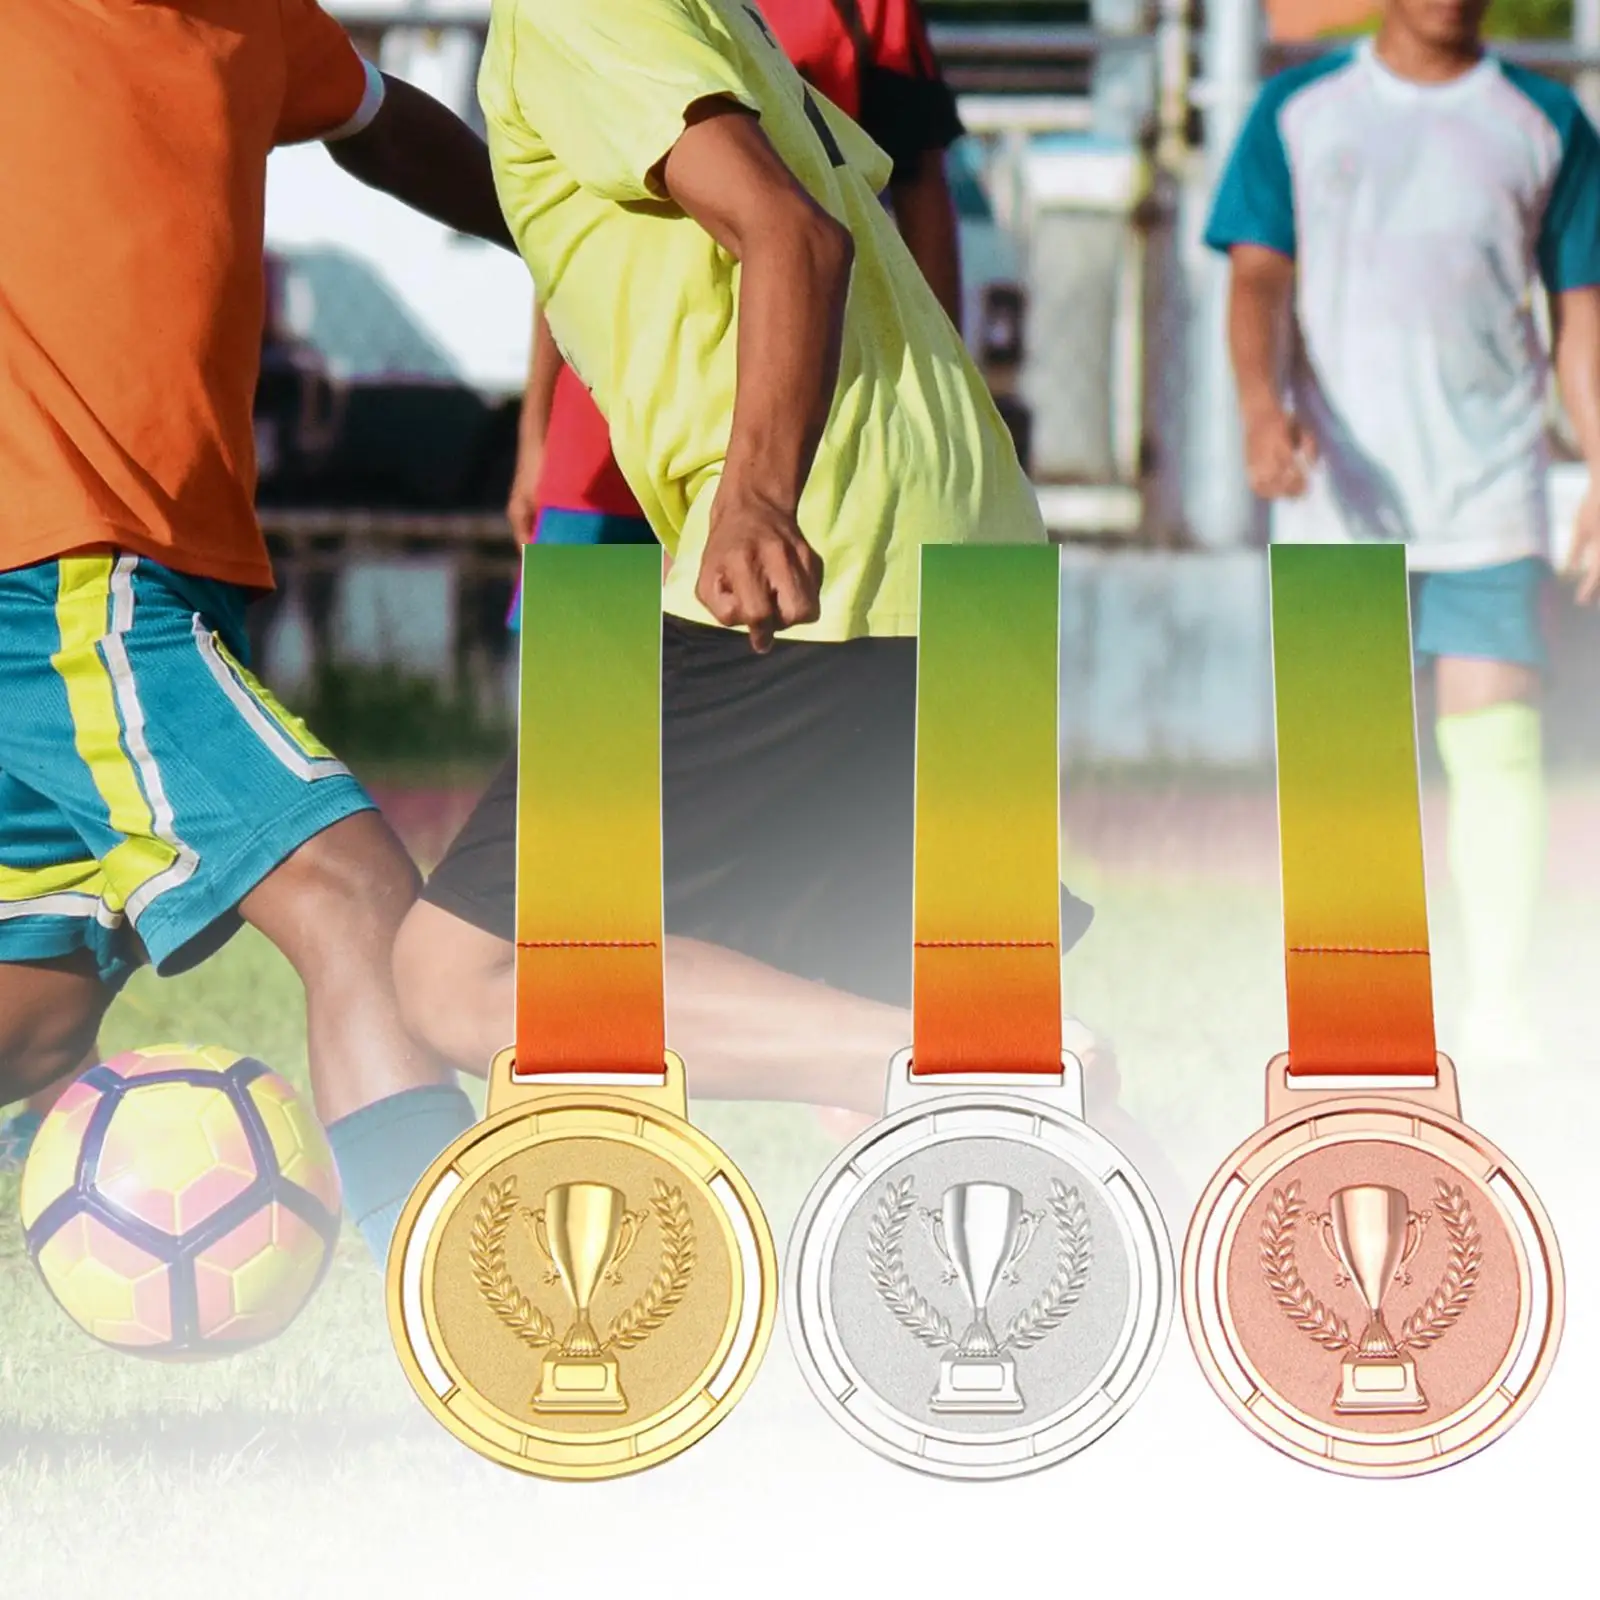 6.5cm Winner Award Medals Game Prizes Souvenirs Celebrations Gifts